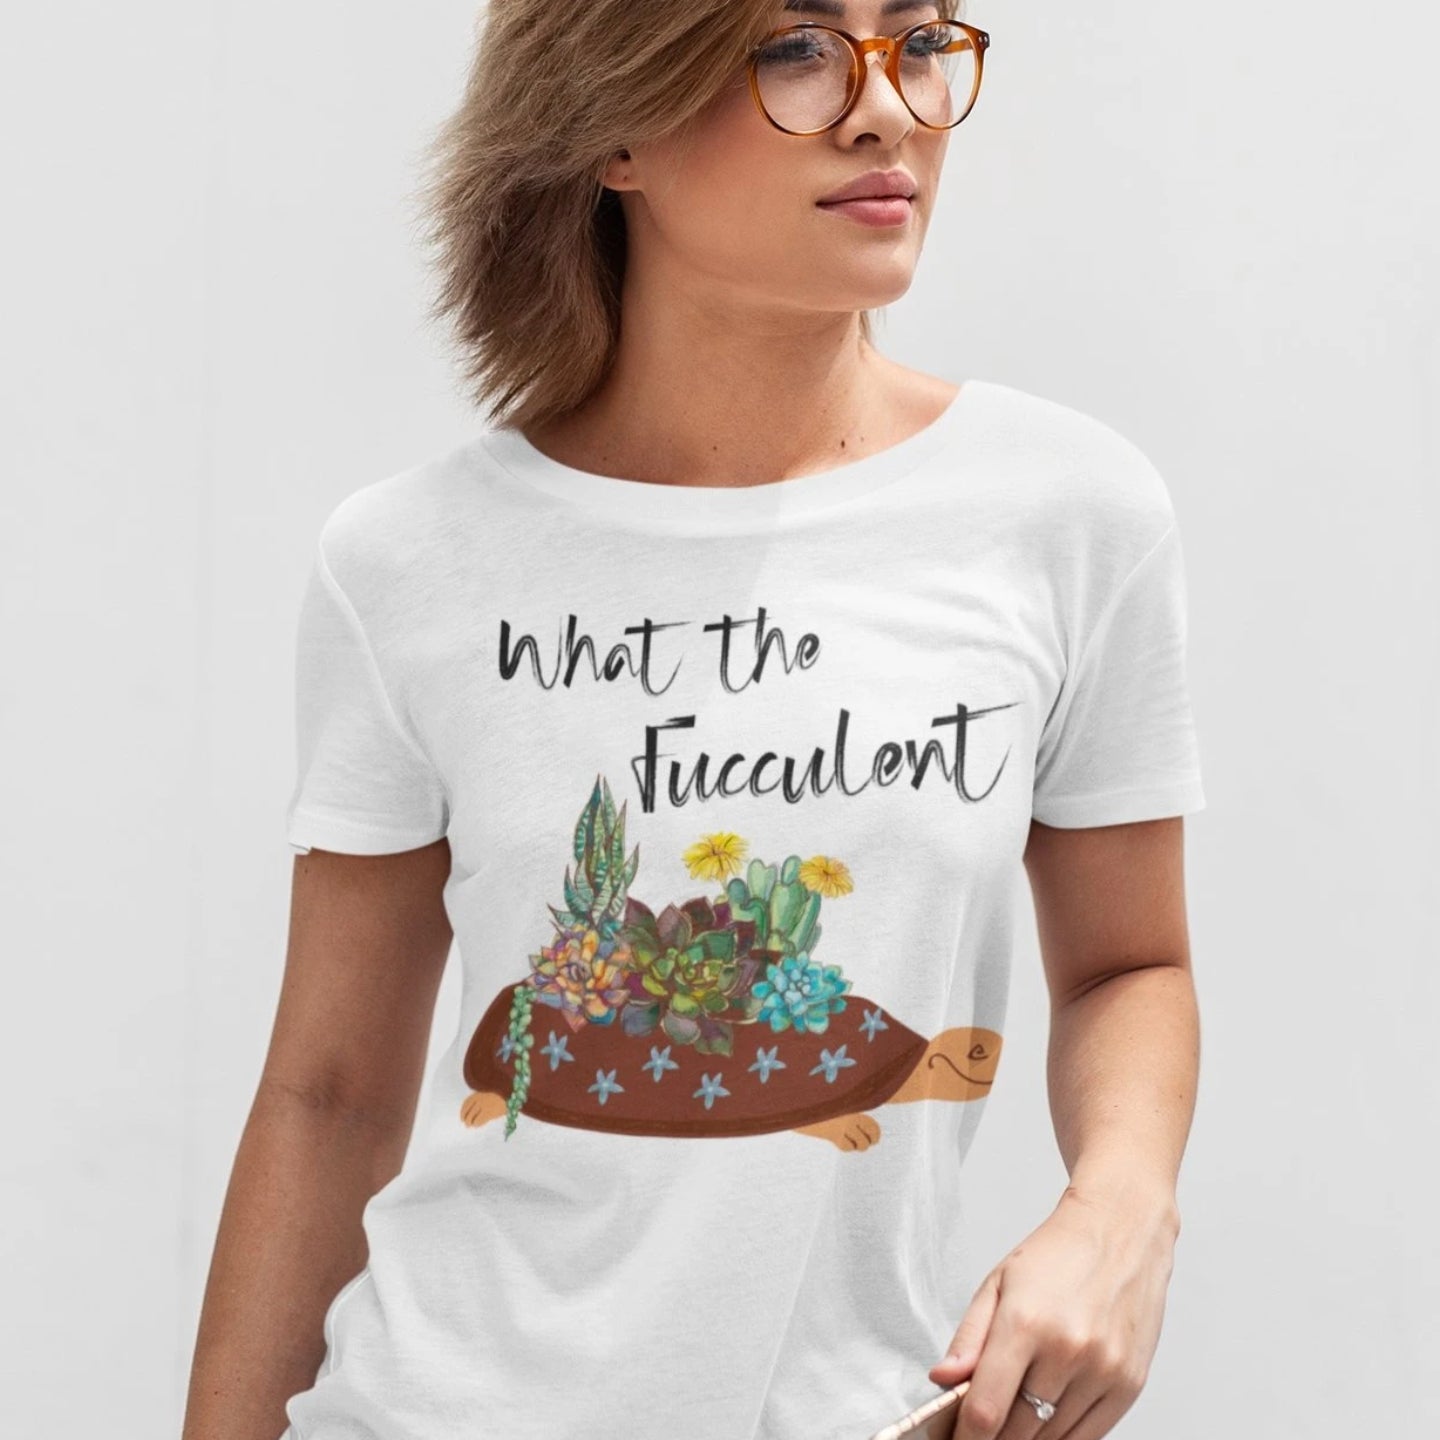 What The Fucculent: Sassy Succulent T-shirt – Where Prickly Attitude Meets Playful Style!